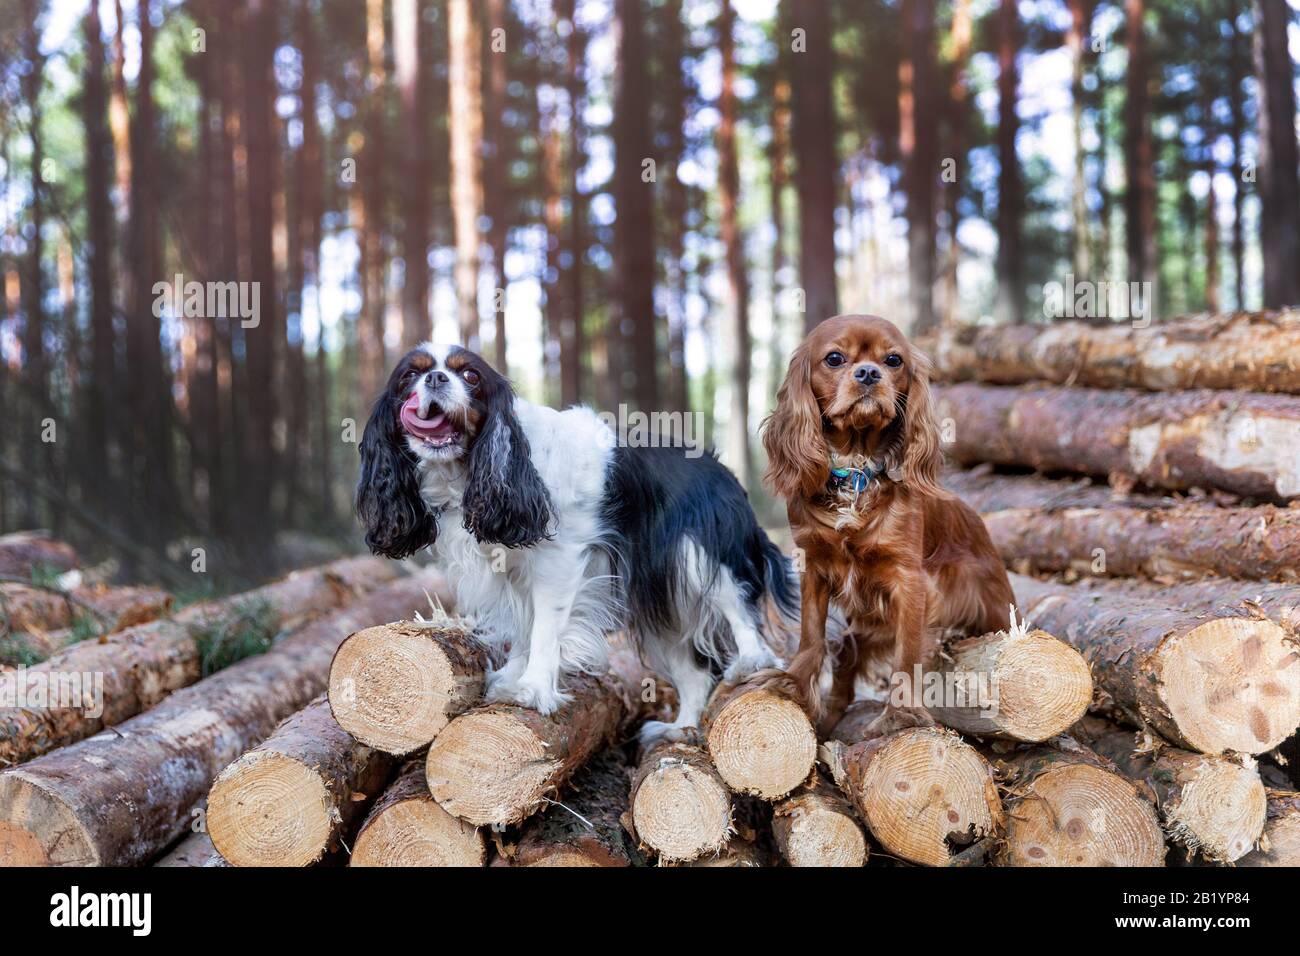 Two dogs on the walk in the forest Stock Photo